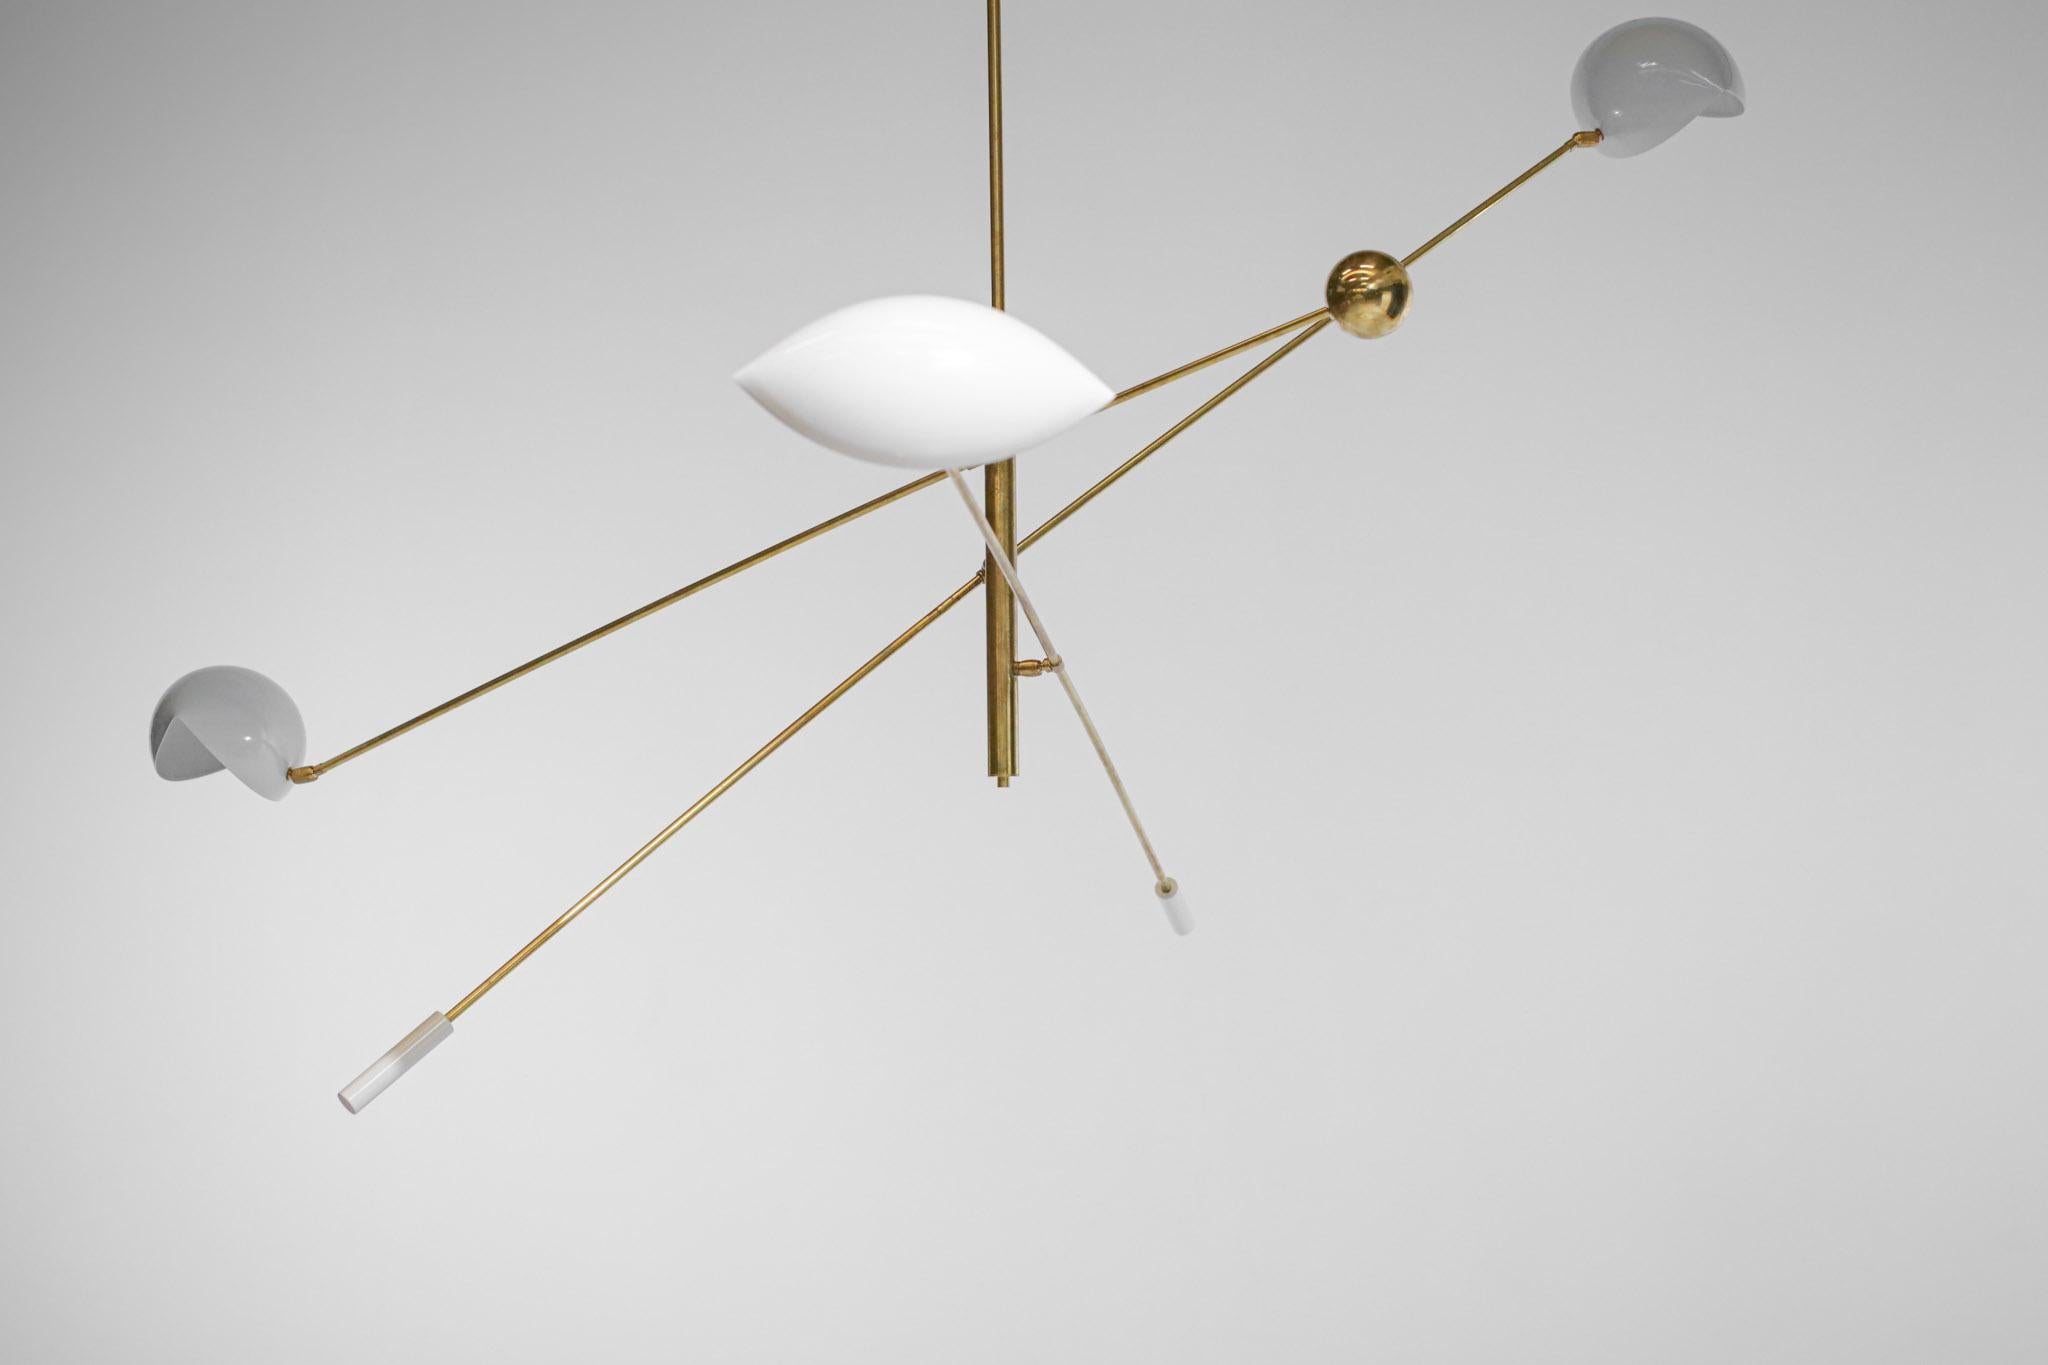 Modern chandelier with pendulum and counterweight, made in style of the Stilnovo publishing house by our Italian craftsman. Structure in solid brass, lampshade and counterweights in off-white lacquered metal that can be adjusted according to your